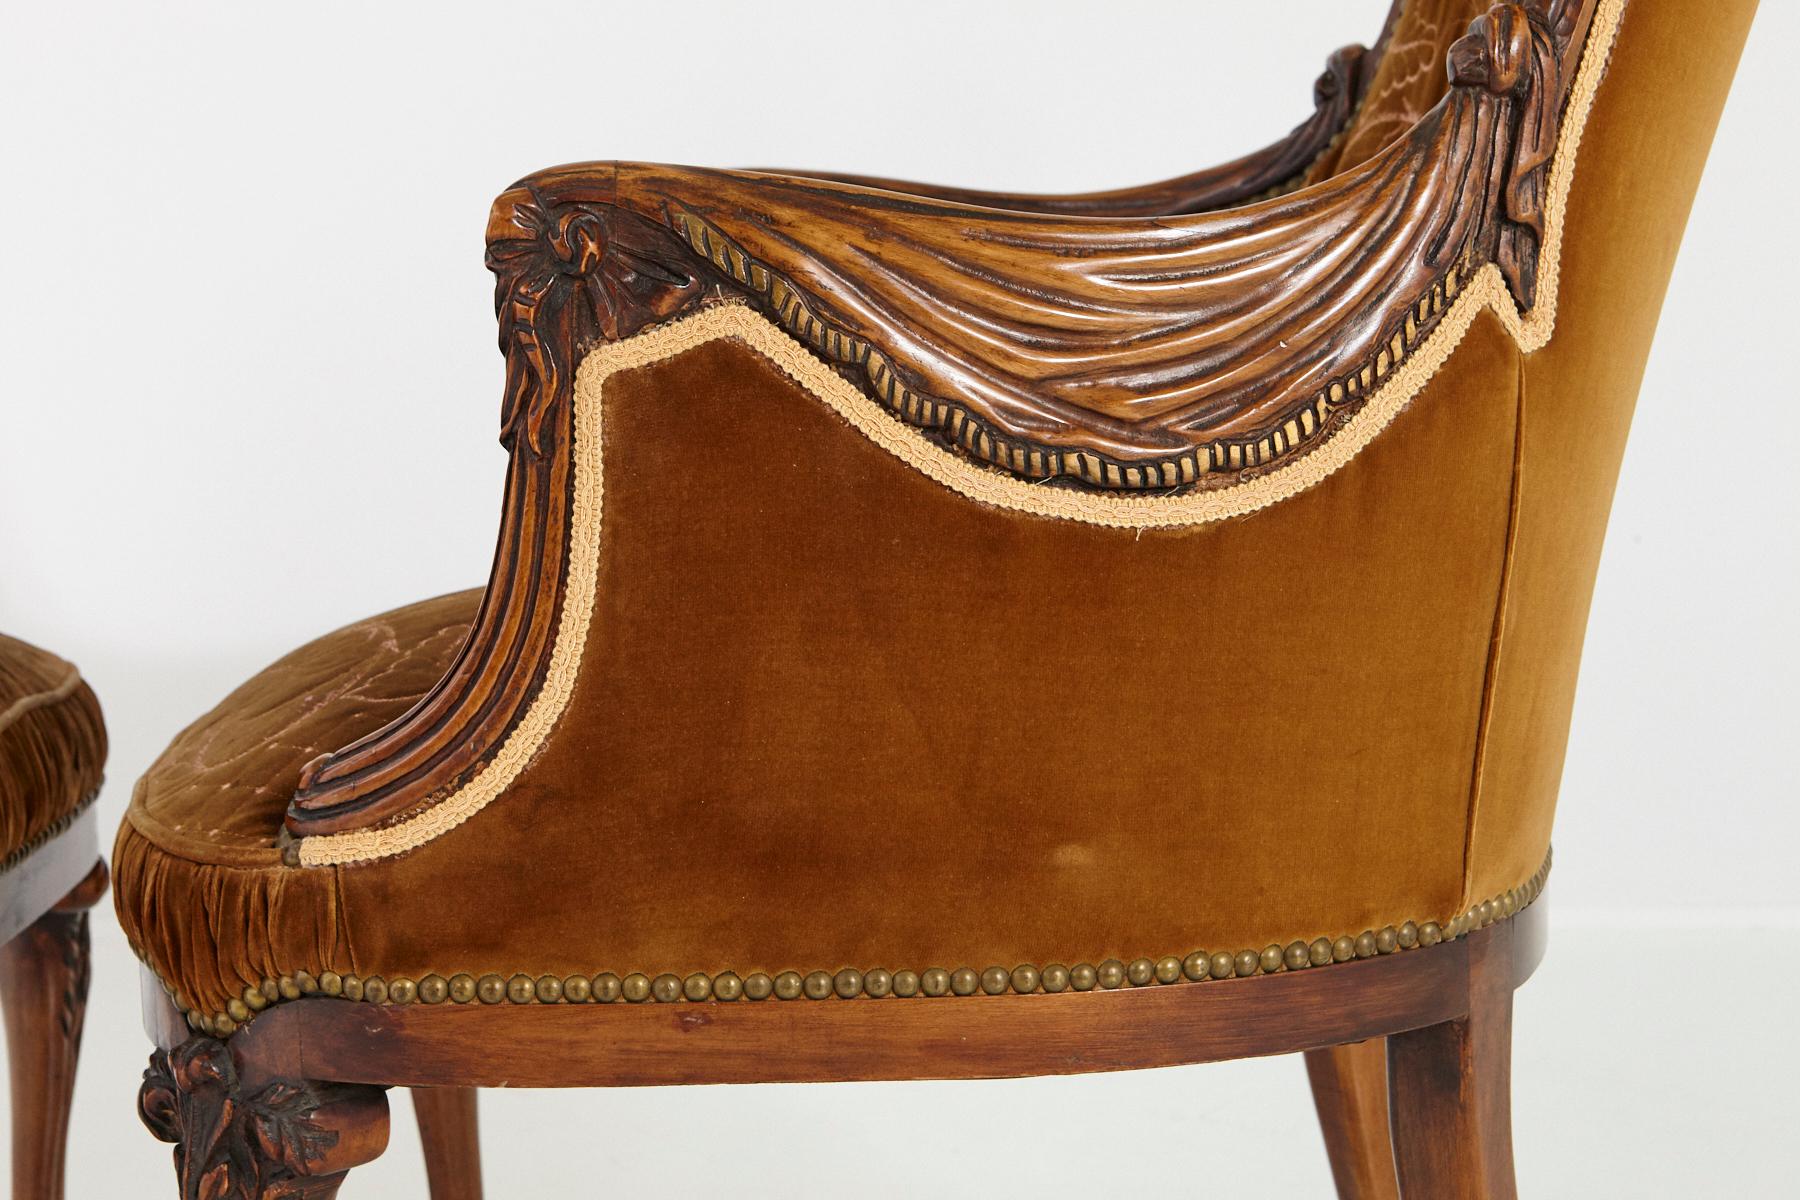 Pair of French Art Nouveau Armchairs, Two-Tone Cognac Colored Embroidered Velvet 14